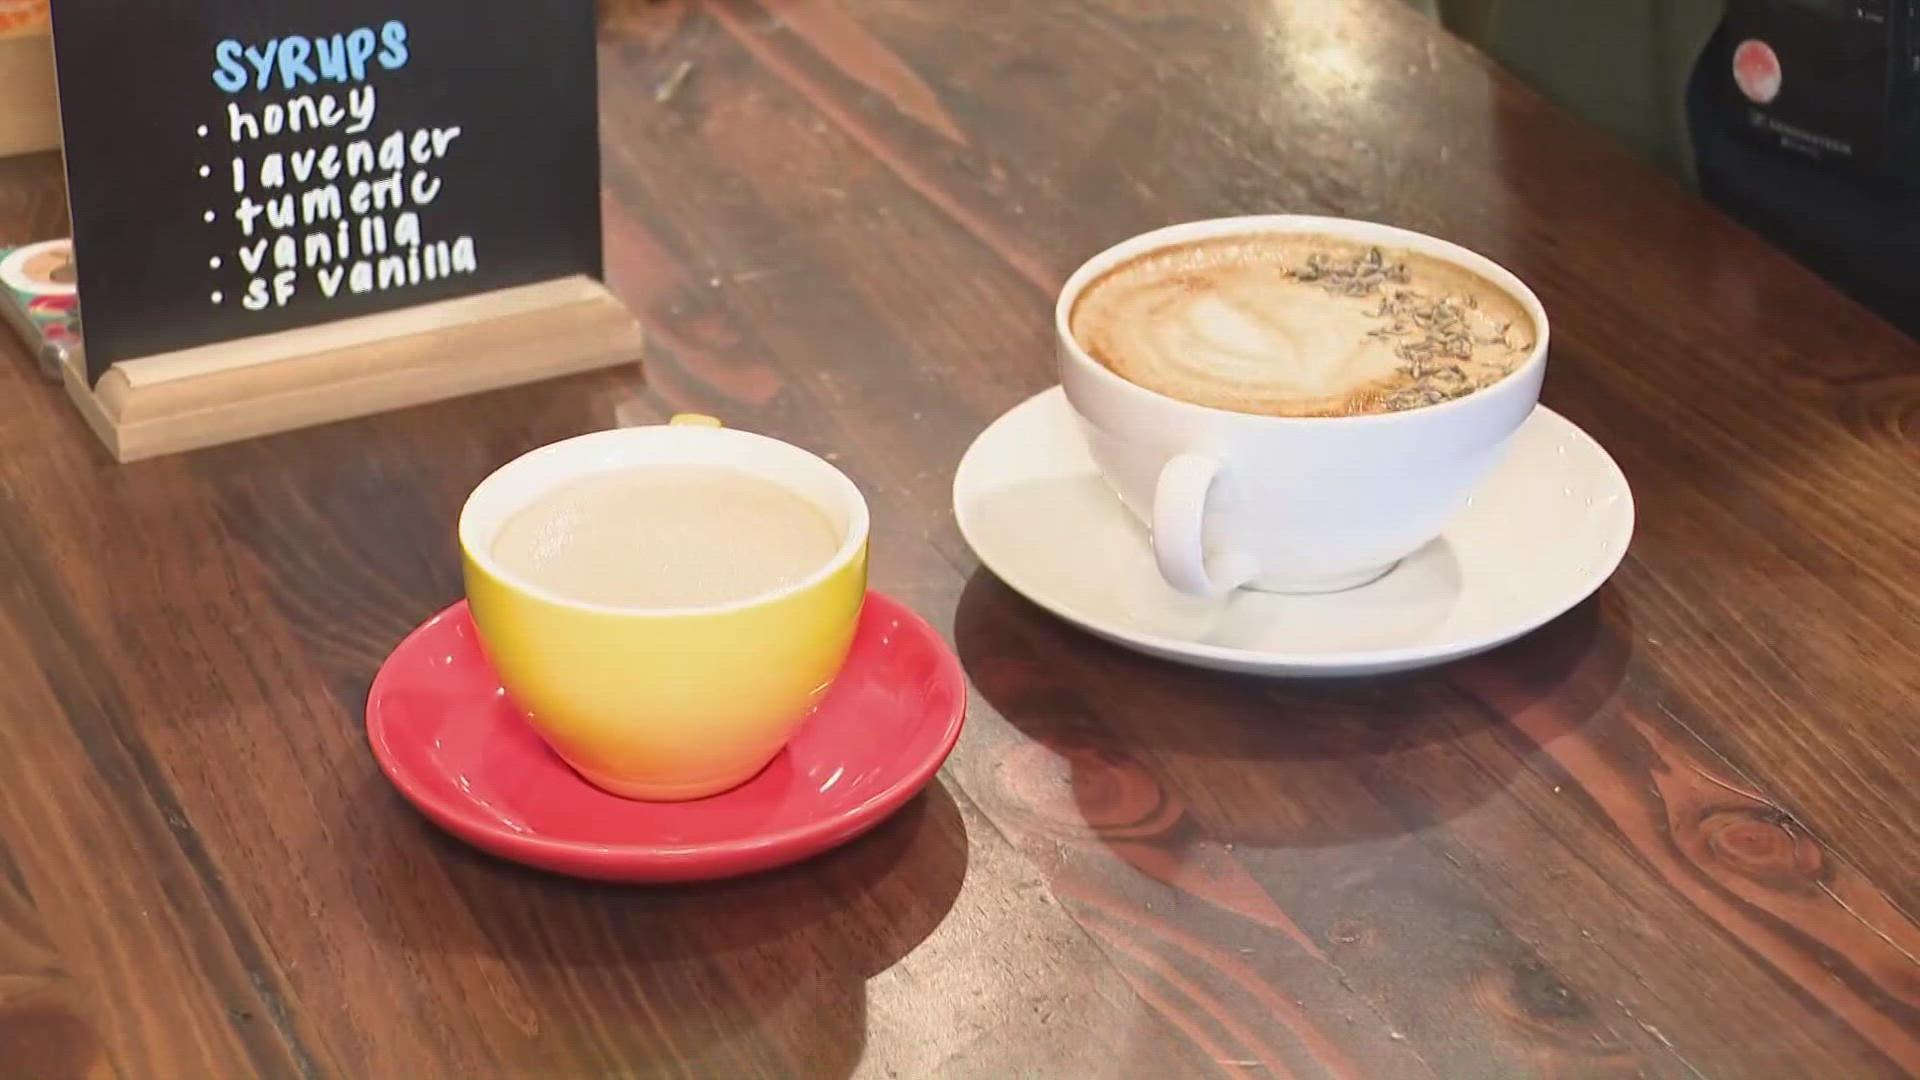 As pandemic cases are remaining low, we are bringing back "First Look." Kierra Cotton checks out a coffee shop that's also a creative space in Tremont.